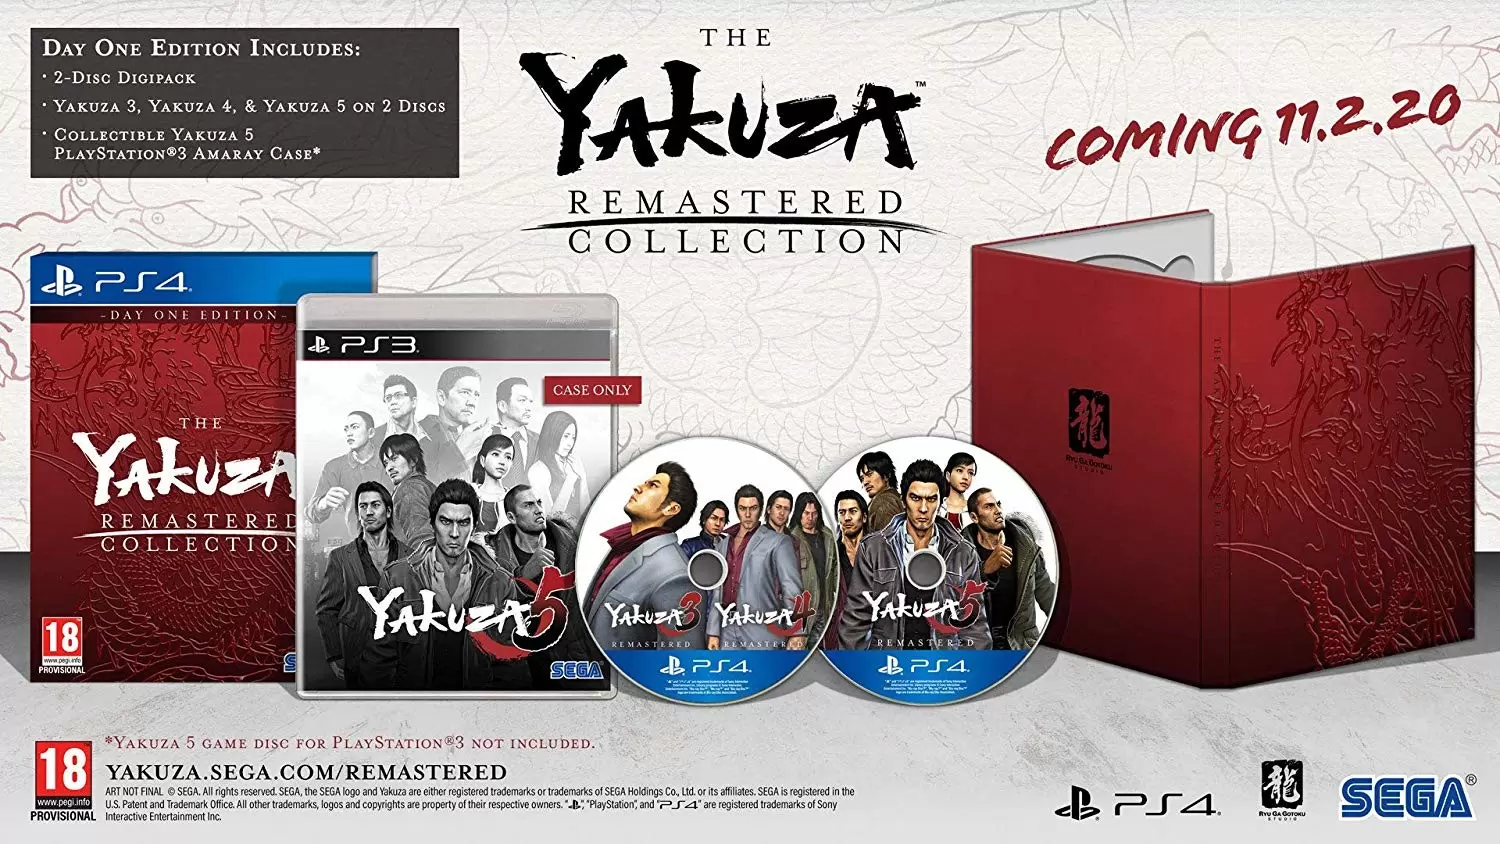 Jeux PS4 - The Yakuza Remastered Collection - Day One Edition